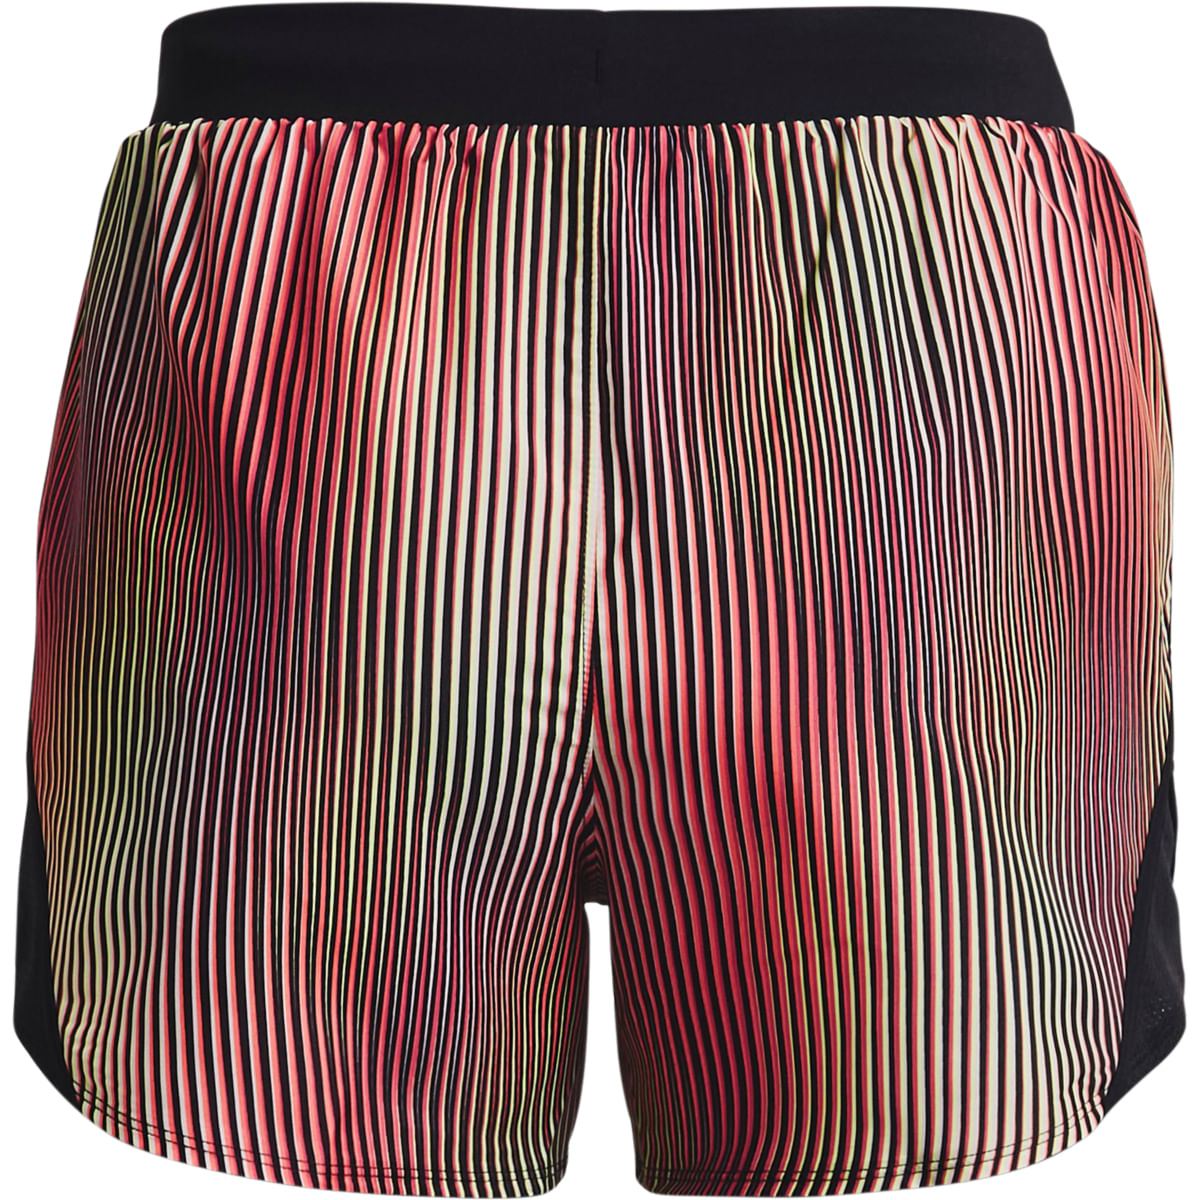 Under Armour Women's Fly-By 2.0 Chroma Shorts, XS, Brilliance/Black